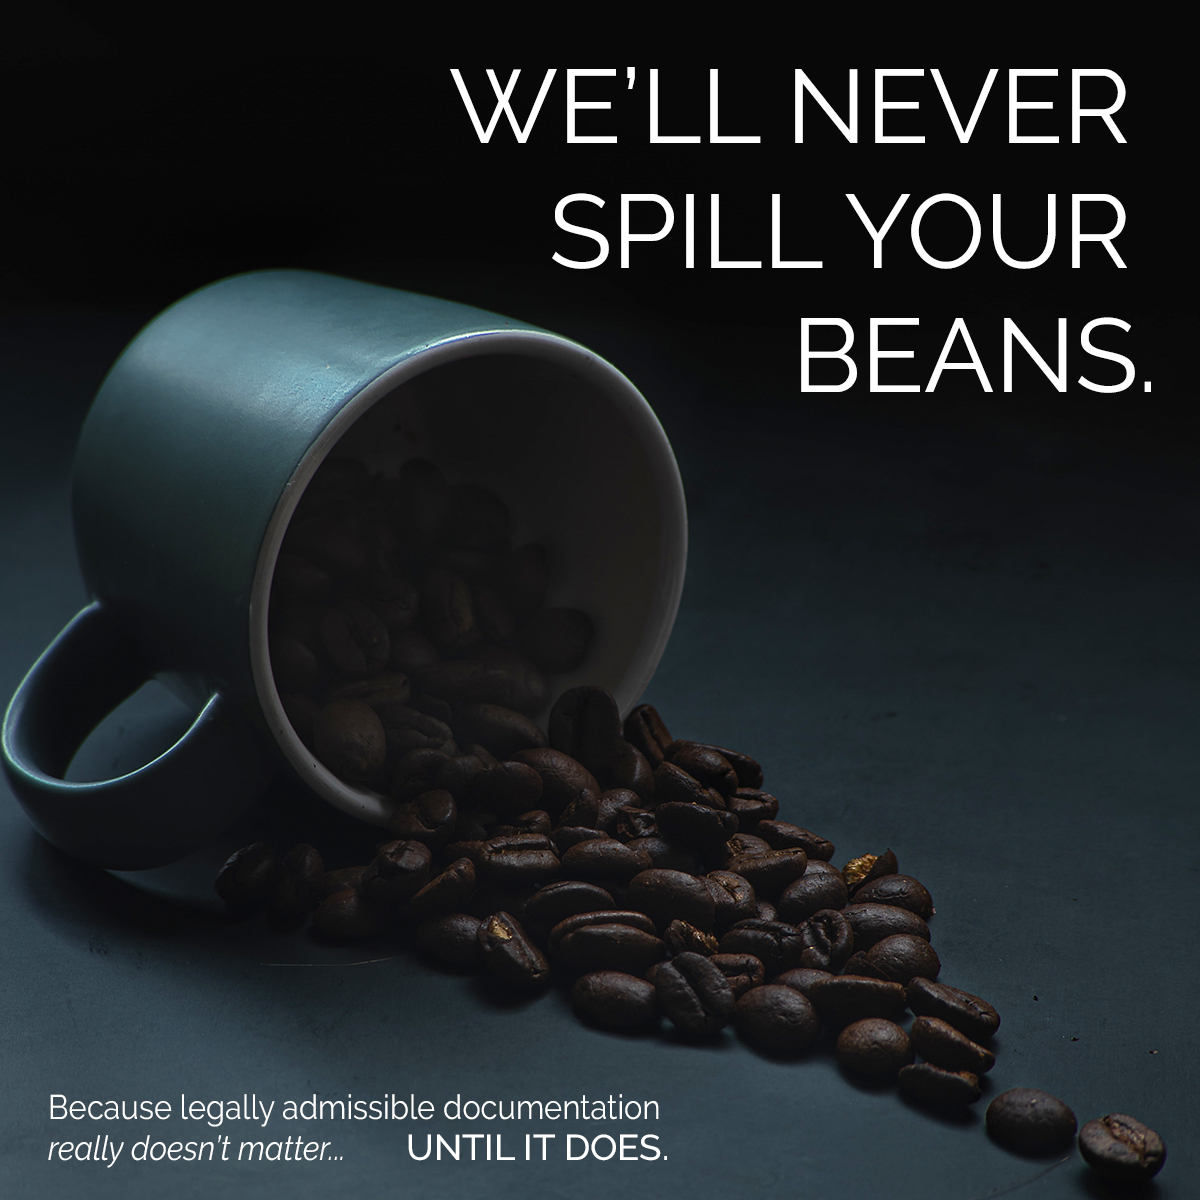 We'll never spill your beans.